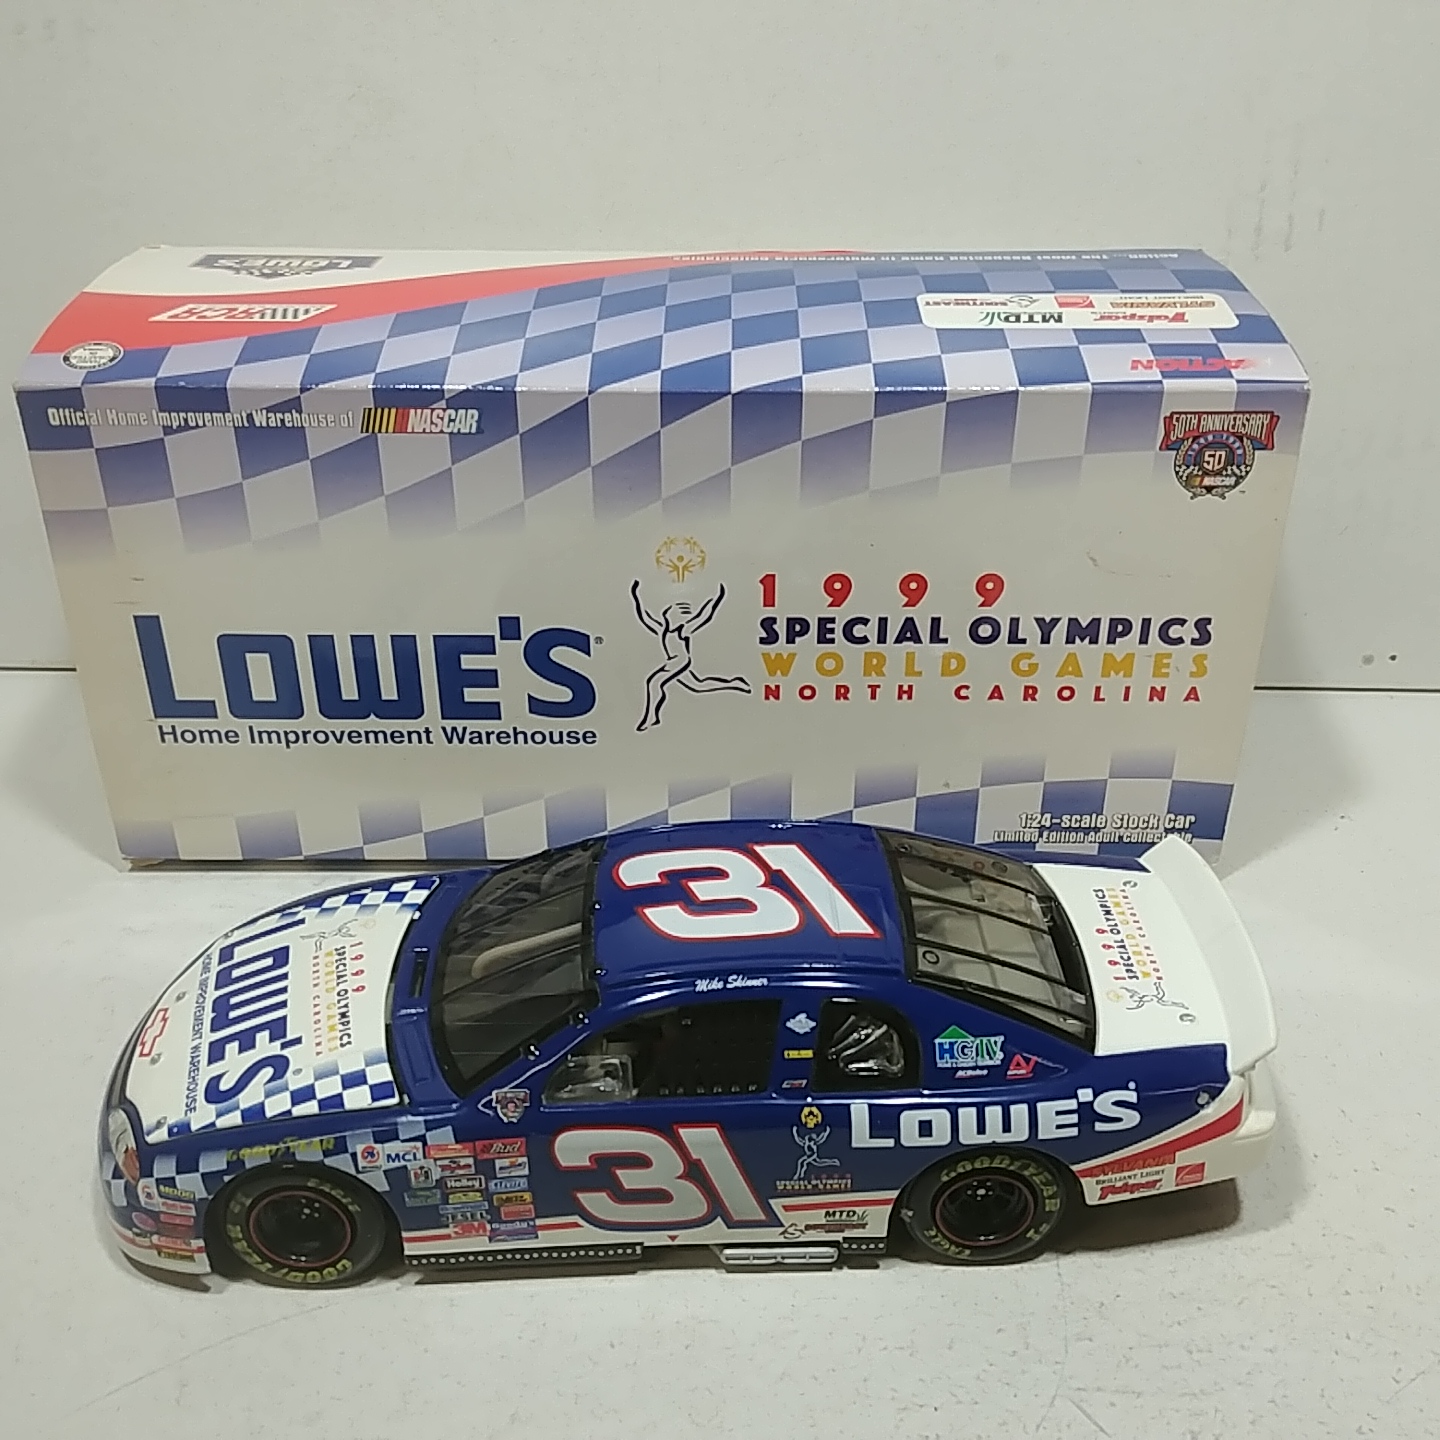 1998 Mike Skinner 1/24th Lowe's "Special Olympics" clear window bank Monte Carlo